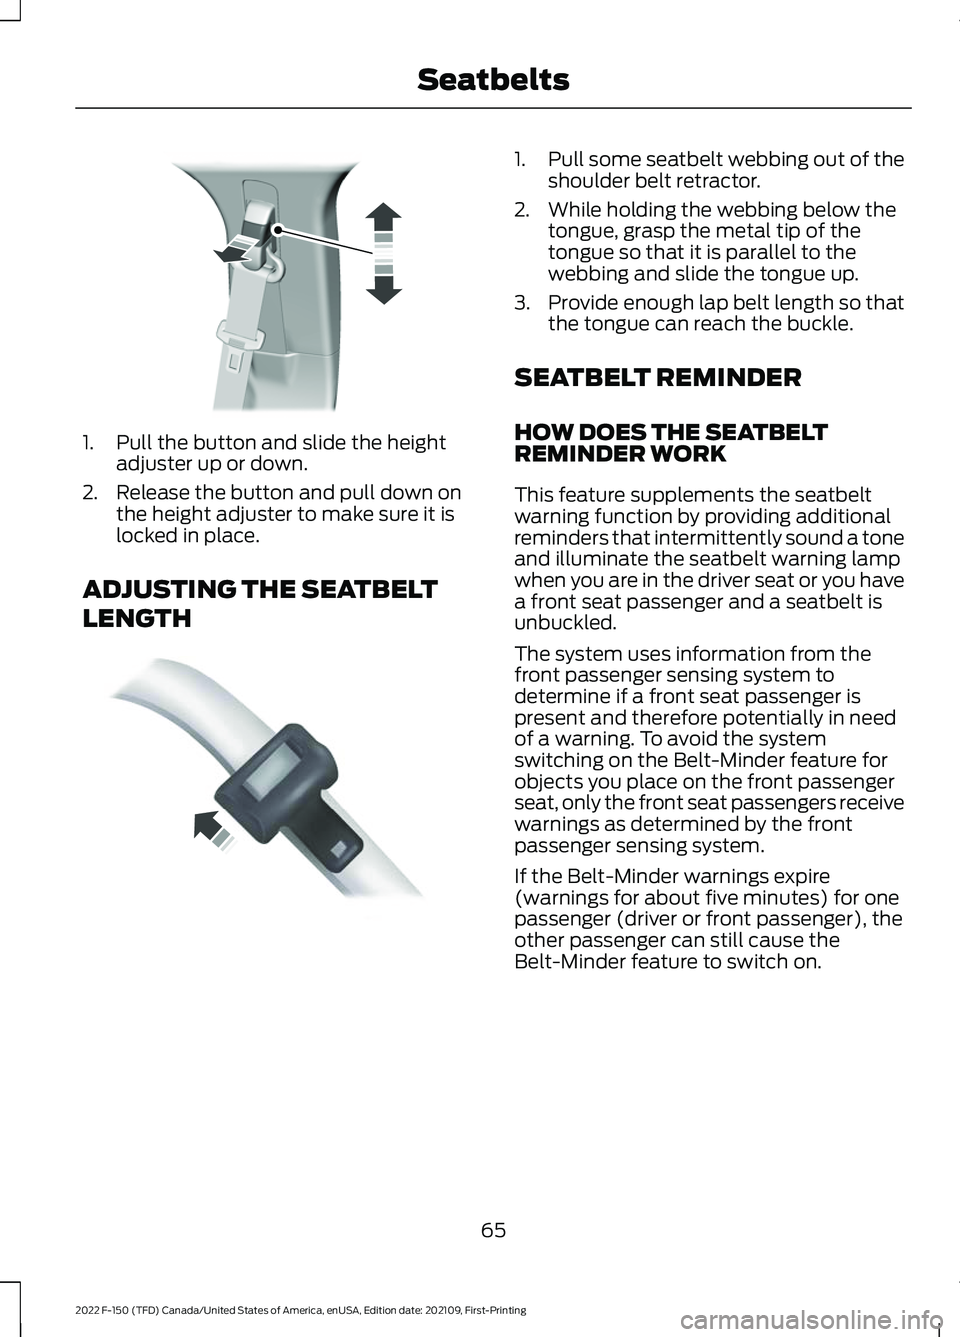 FORD F-150 2022 Repair Manual 1. Pull the button and slide the height
adjuster up or down.
2. Release the button and pull down on the height adjuster to make sure it is
locked in place.
ADJUSTING THE SEATBELT
LENGTH 1.
Pull some s